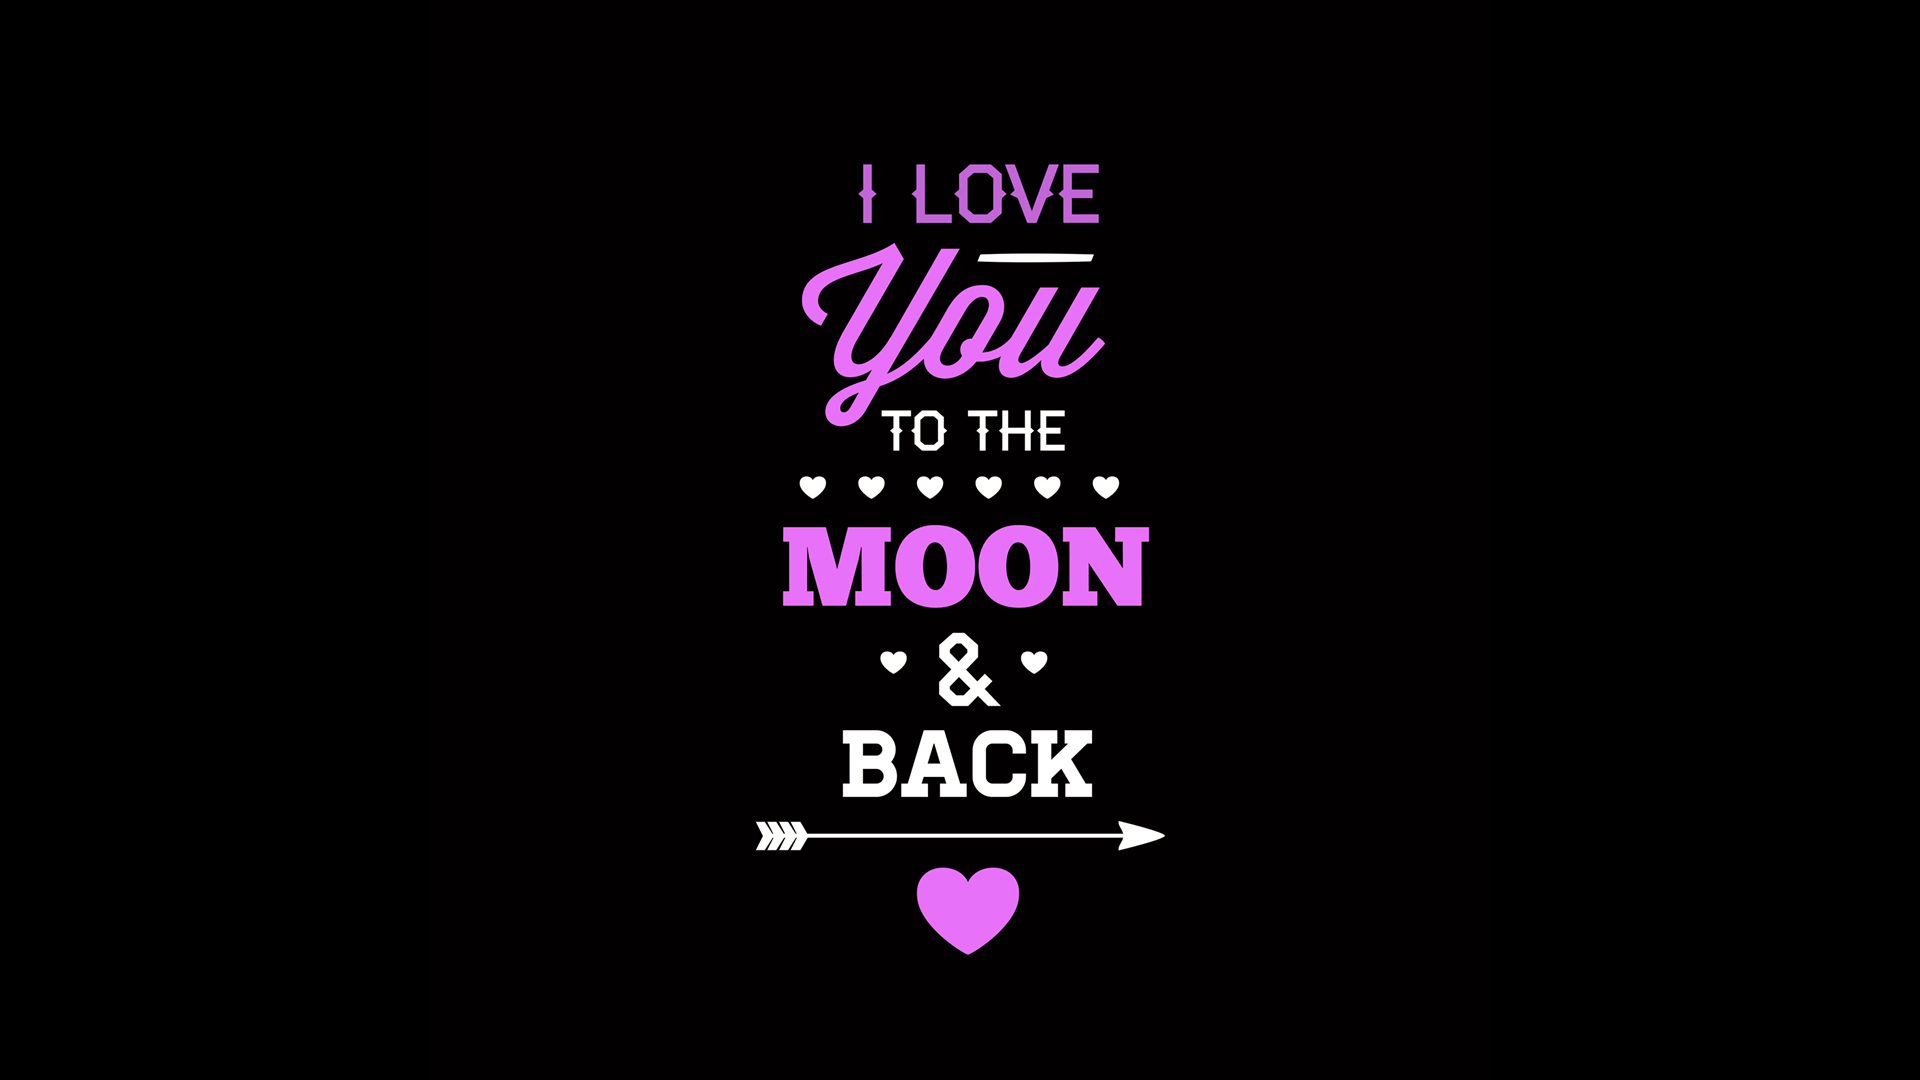 I Love You To The Moon And Back Wallpaper 43090